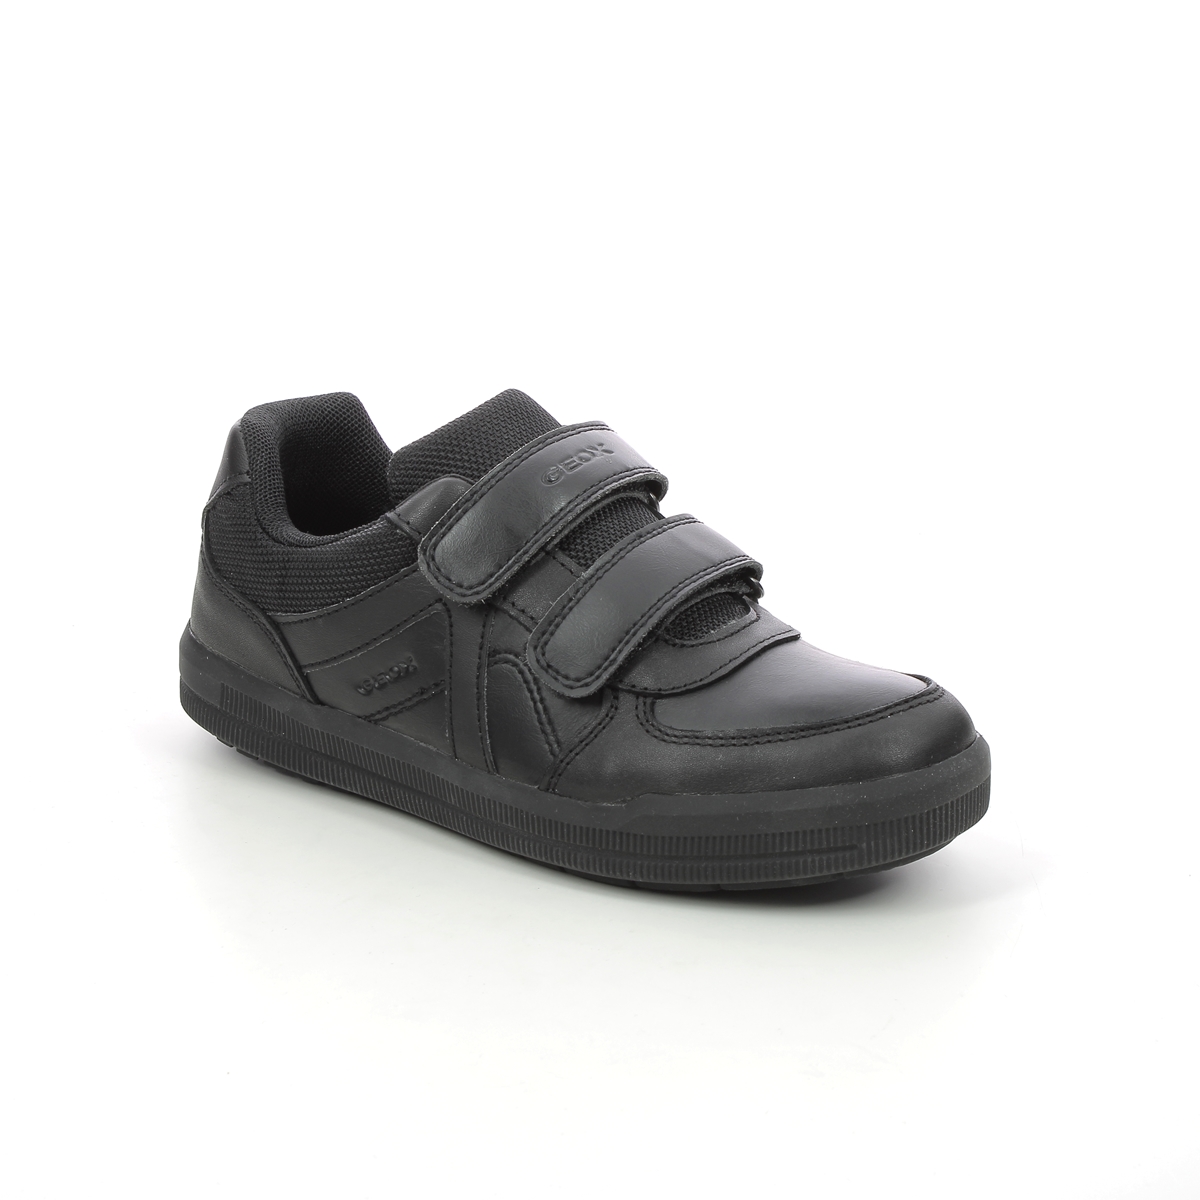 Geox - Arzach Boy Vel (Black Leather) J844Ae-C9999 In Size 32 In Plain Black Leather For School For kids